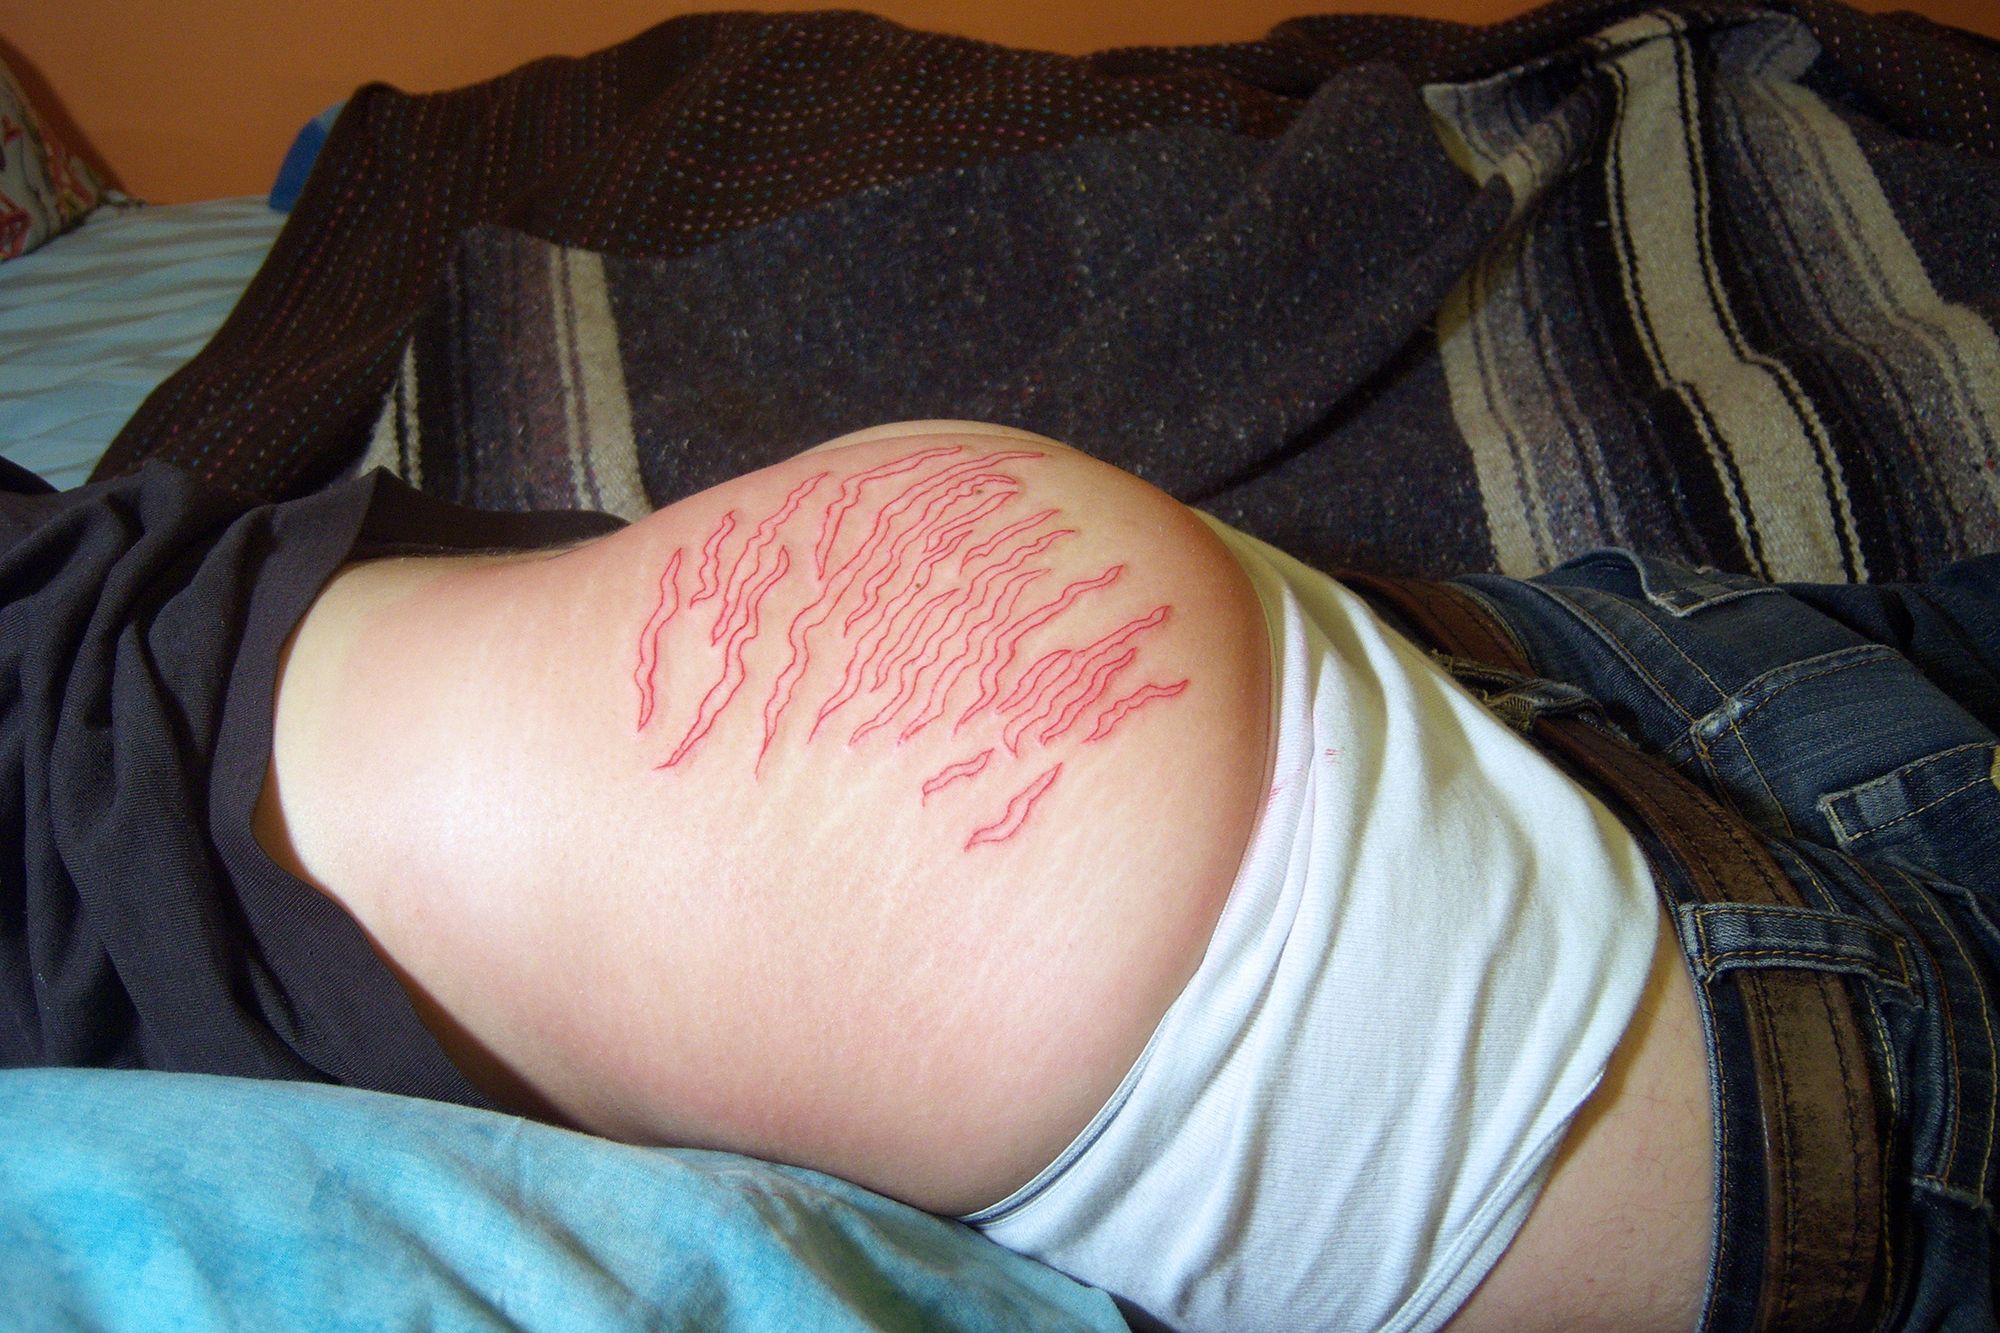 A photograph of someone lying face down in bed, their head obscured, with red tattooed stretch marks covering one side of their butt. 